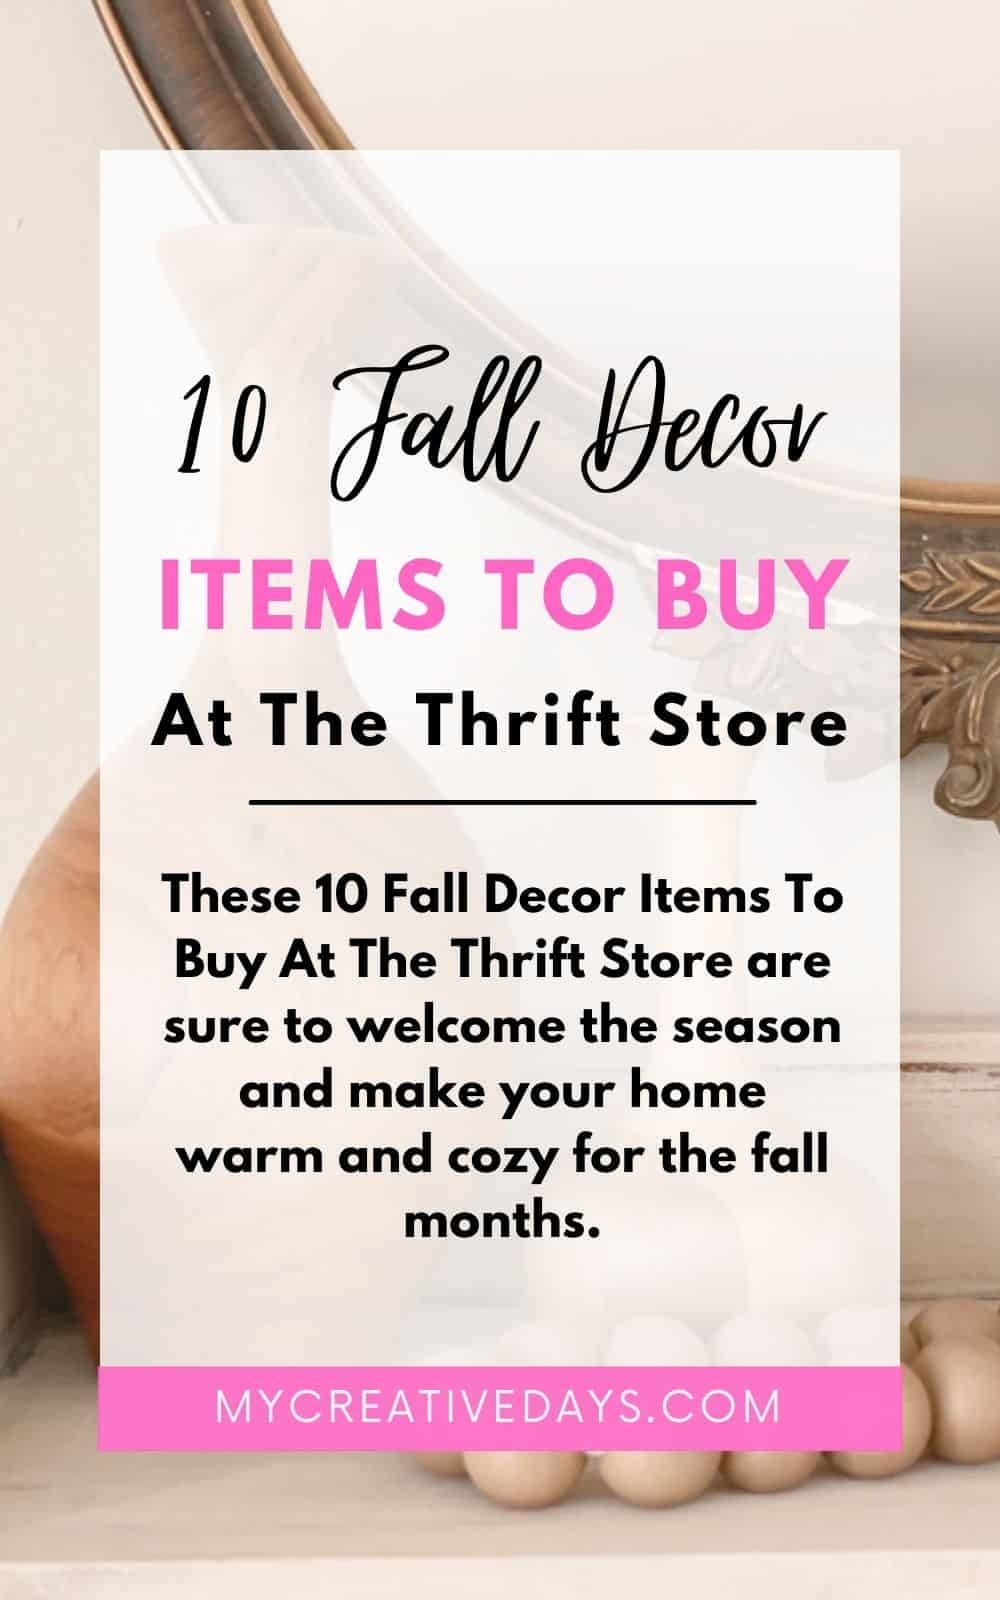 These 10 Fall Decor Items To Buy At The Thrift Store are sure to welcome the season and make your home warm and cozy for the fall months.